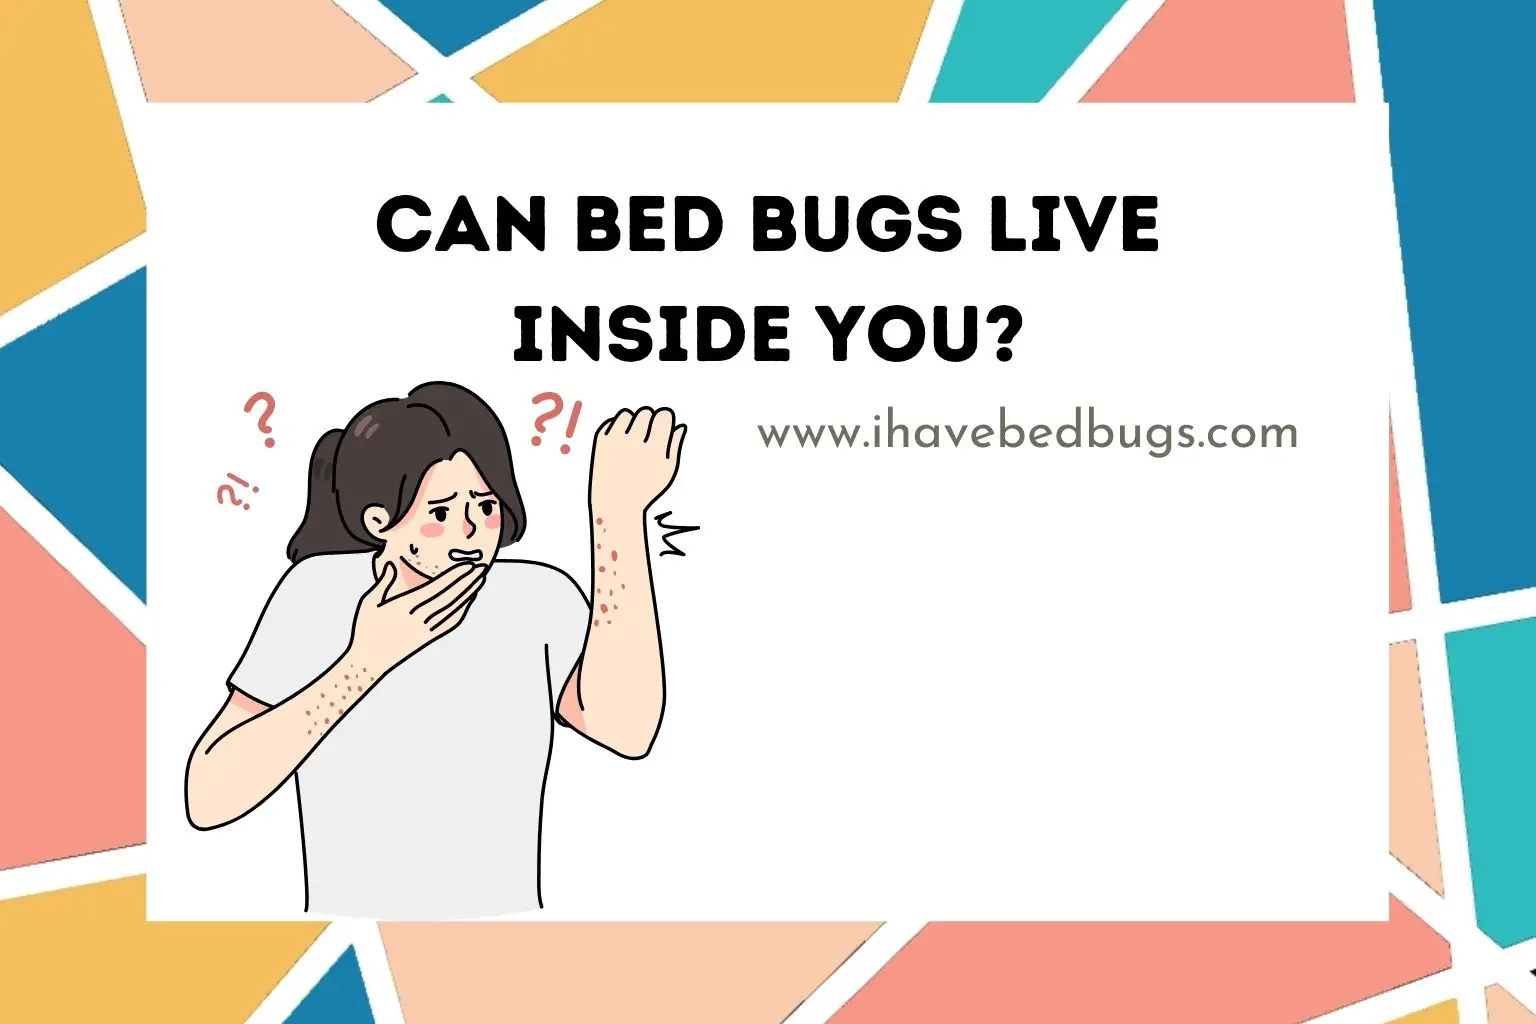 Can bed bugs live inside you